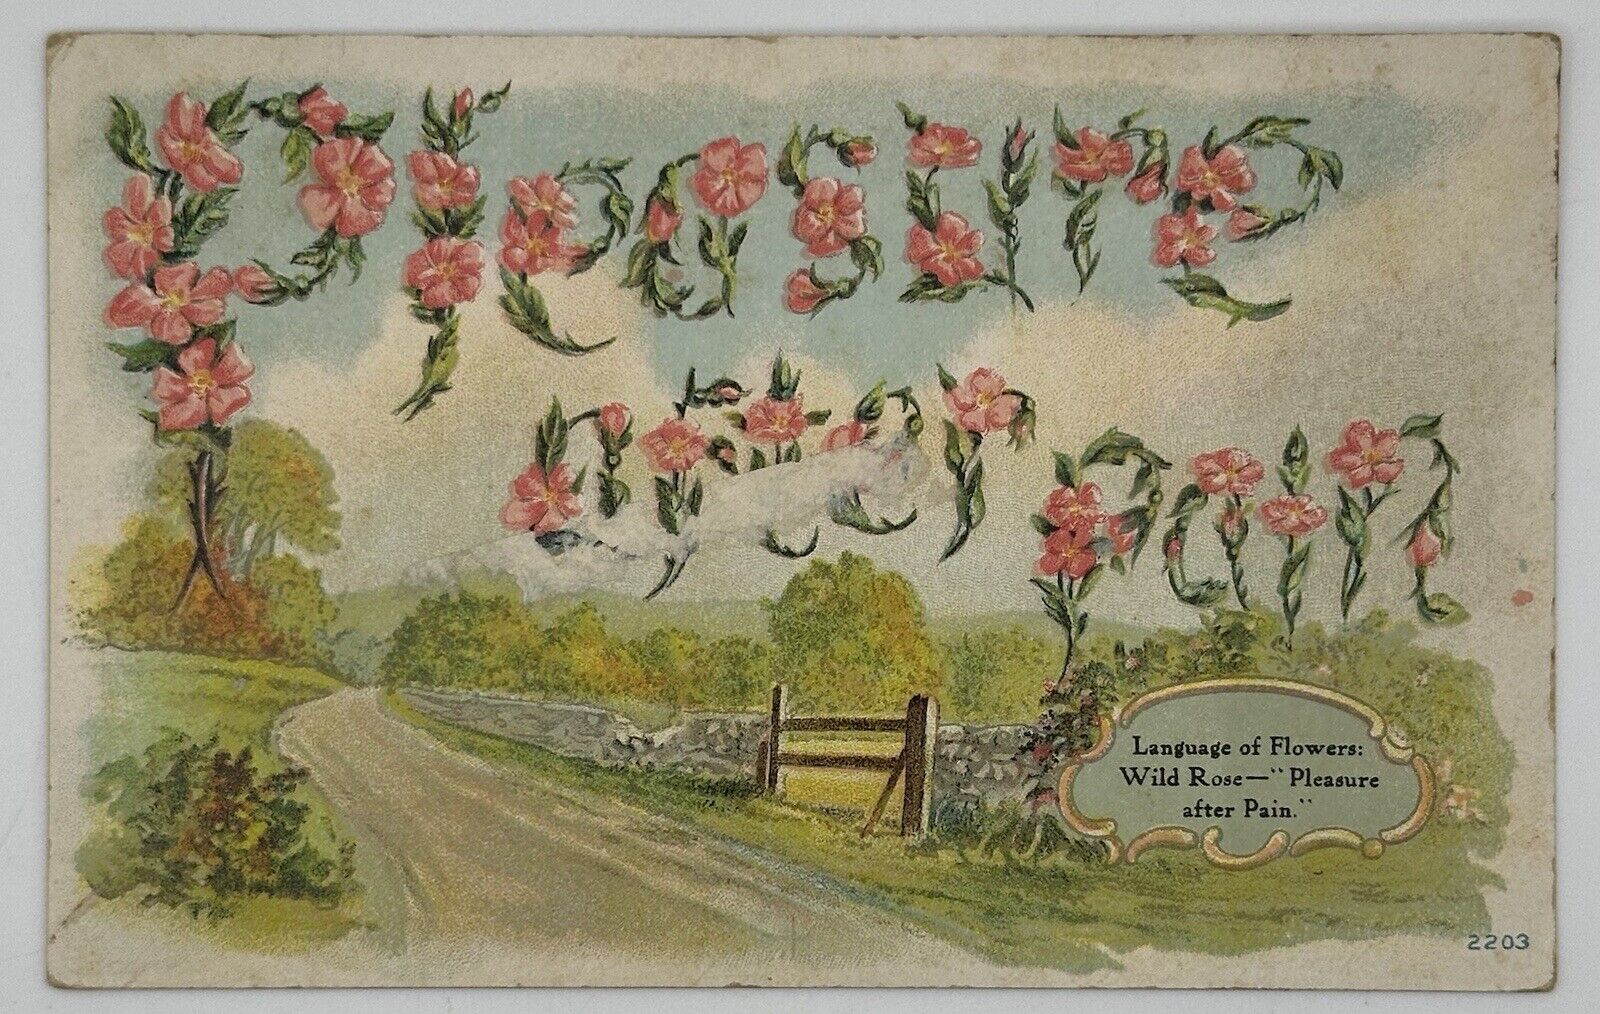 Antique 1909 Language of Flowers Post Card -Wild Rose-Pleasure after Pain